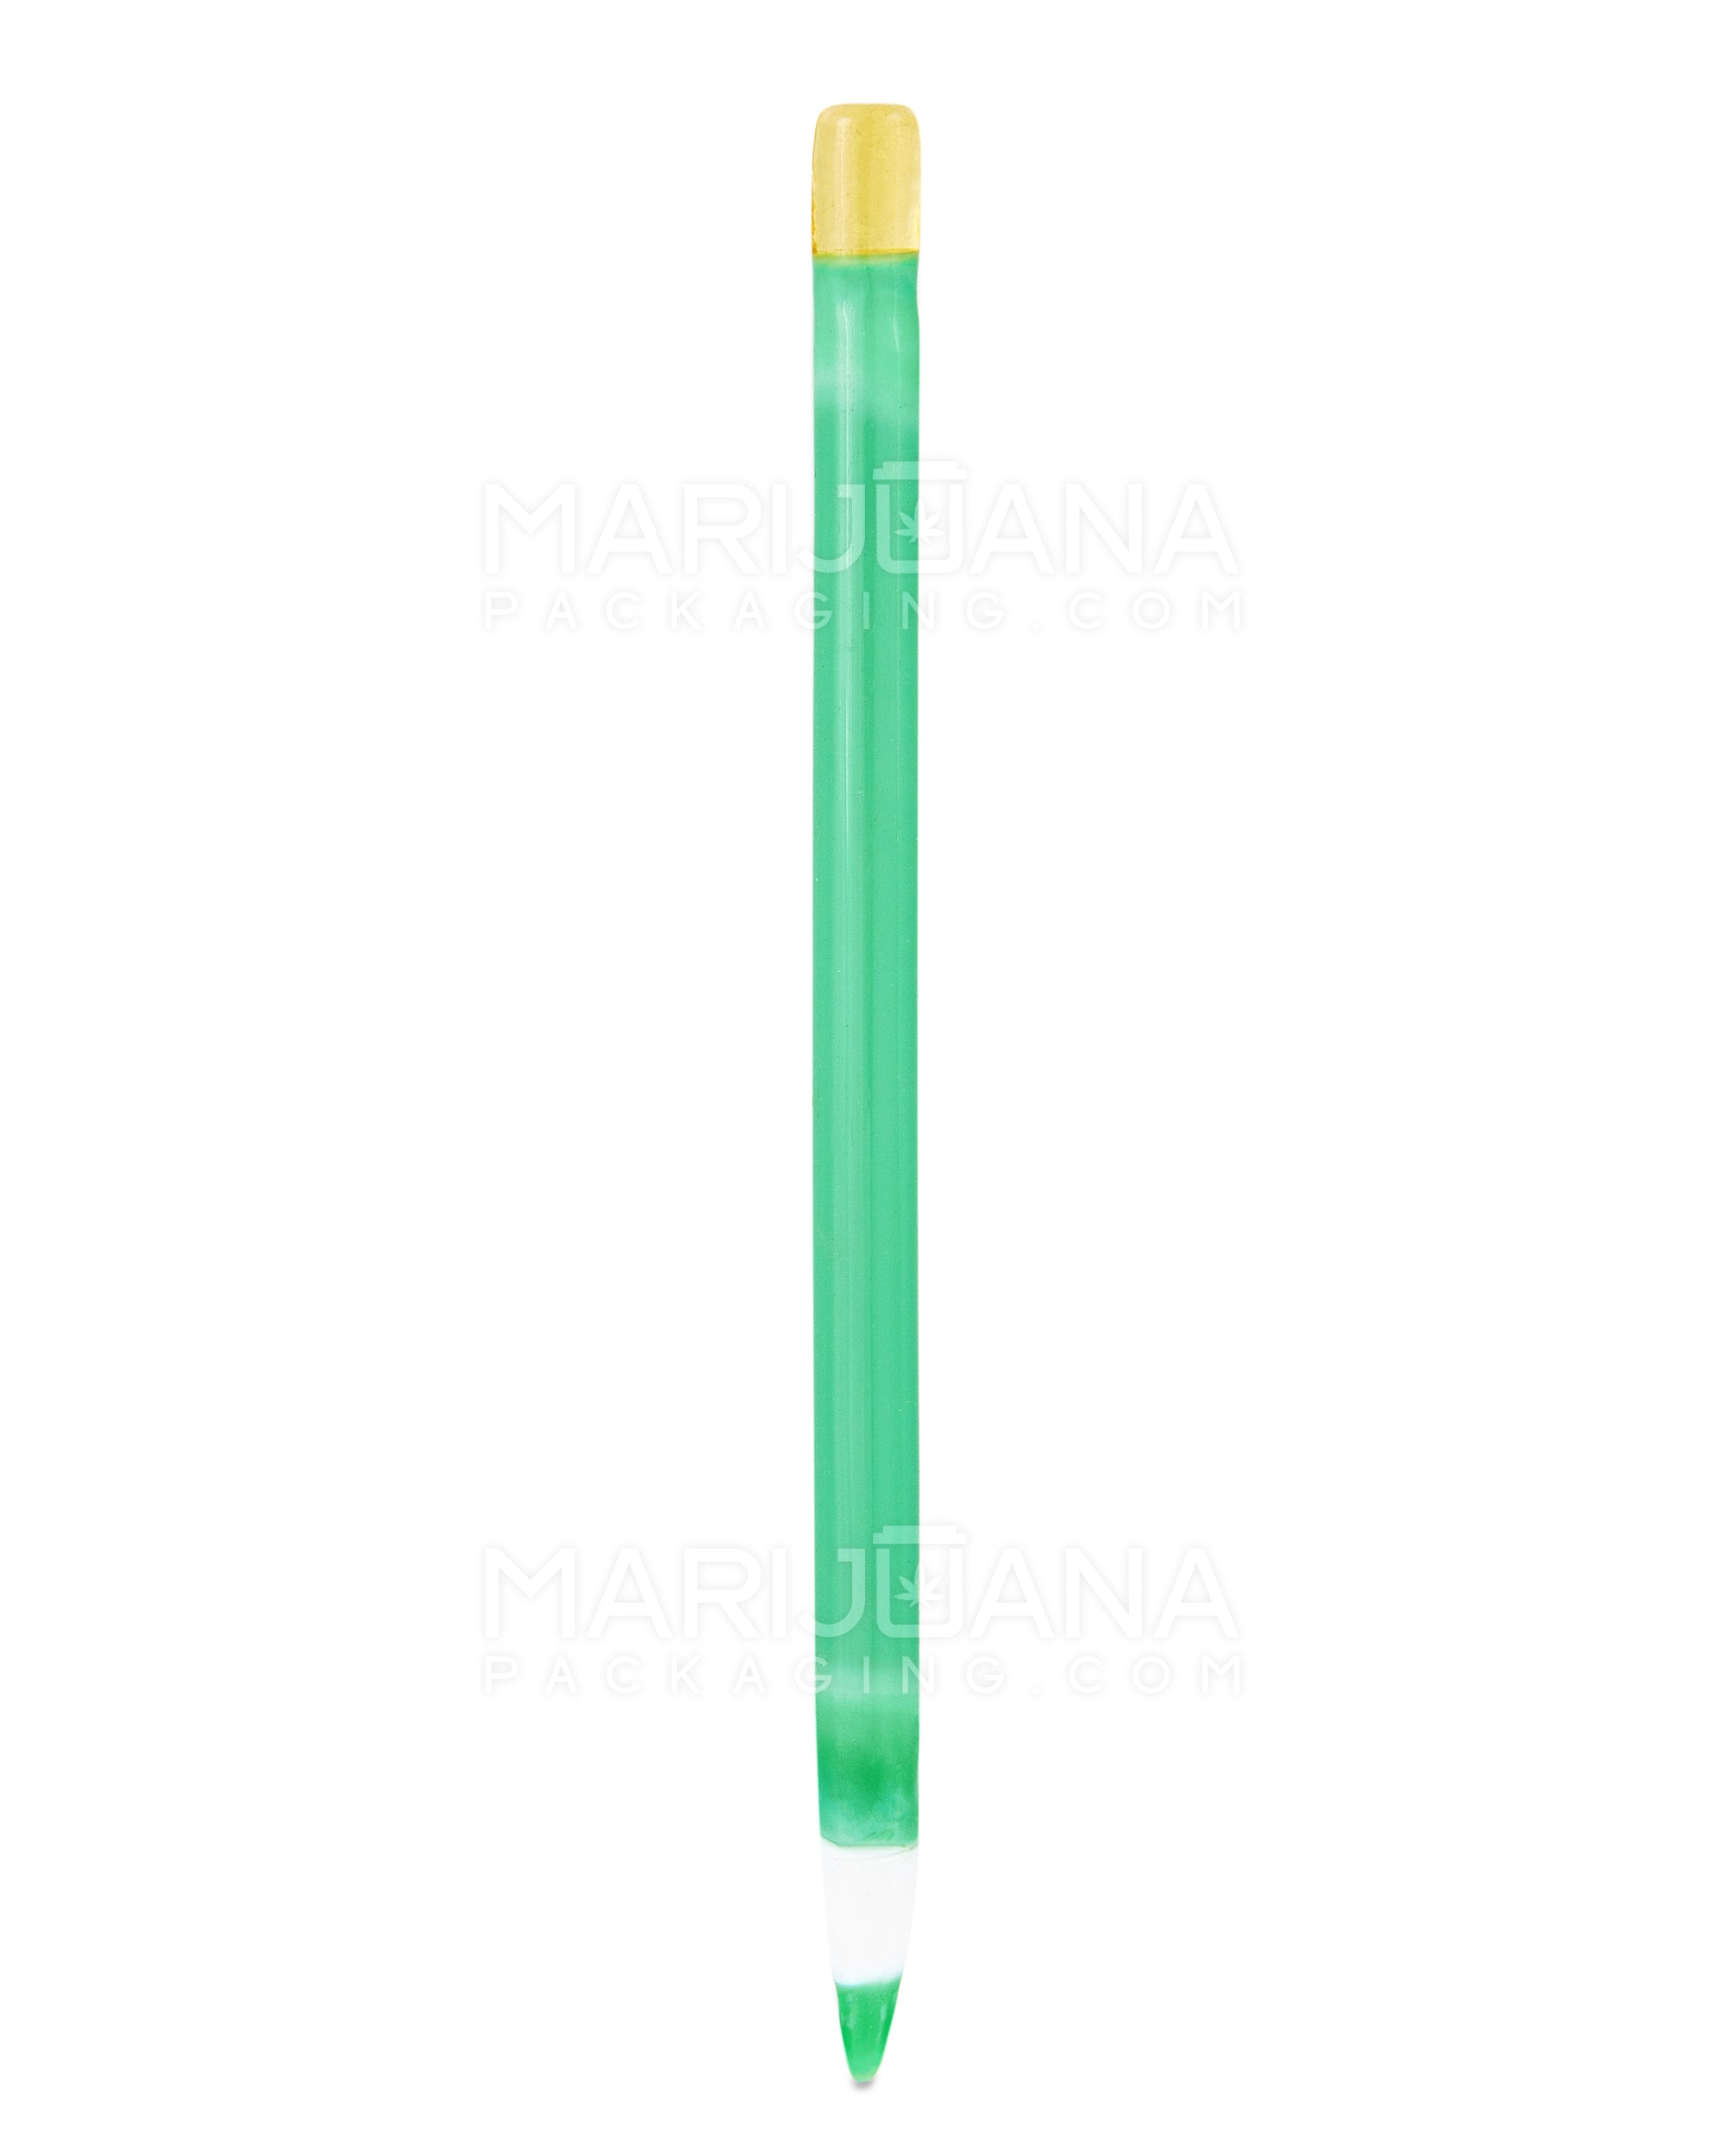 Pointed Pencil Dab Tool w/ Fumed Eraser | 4.5in Long - Glass - Assorted - 5